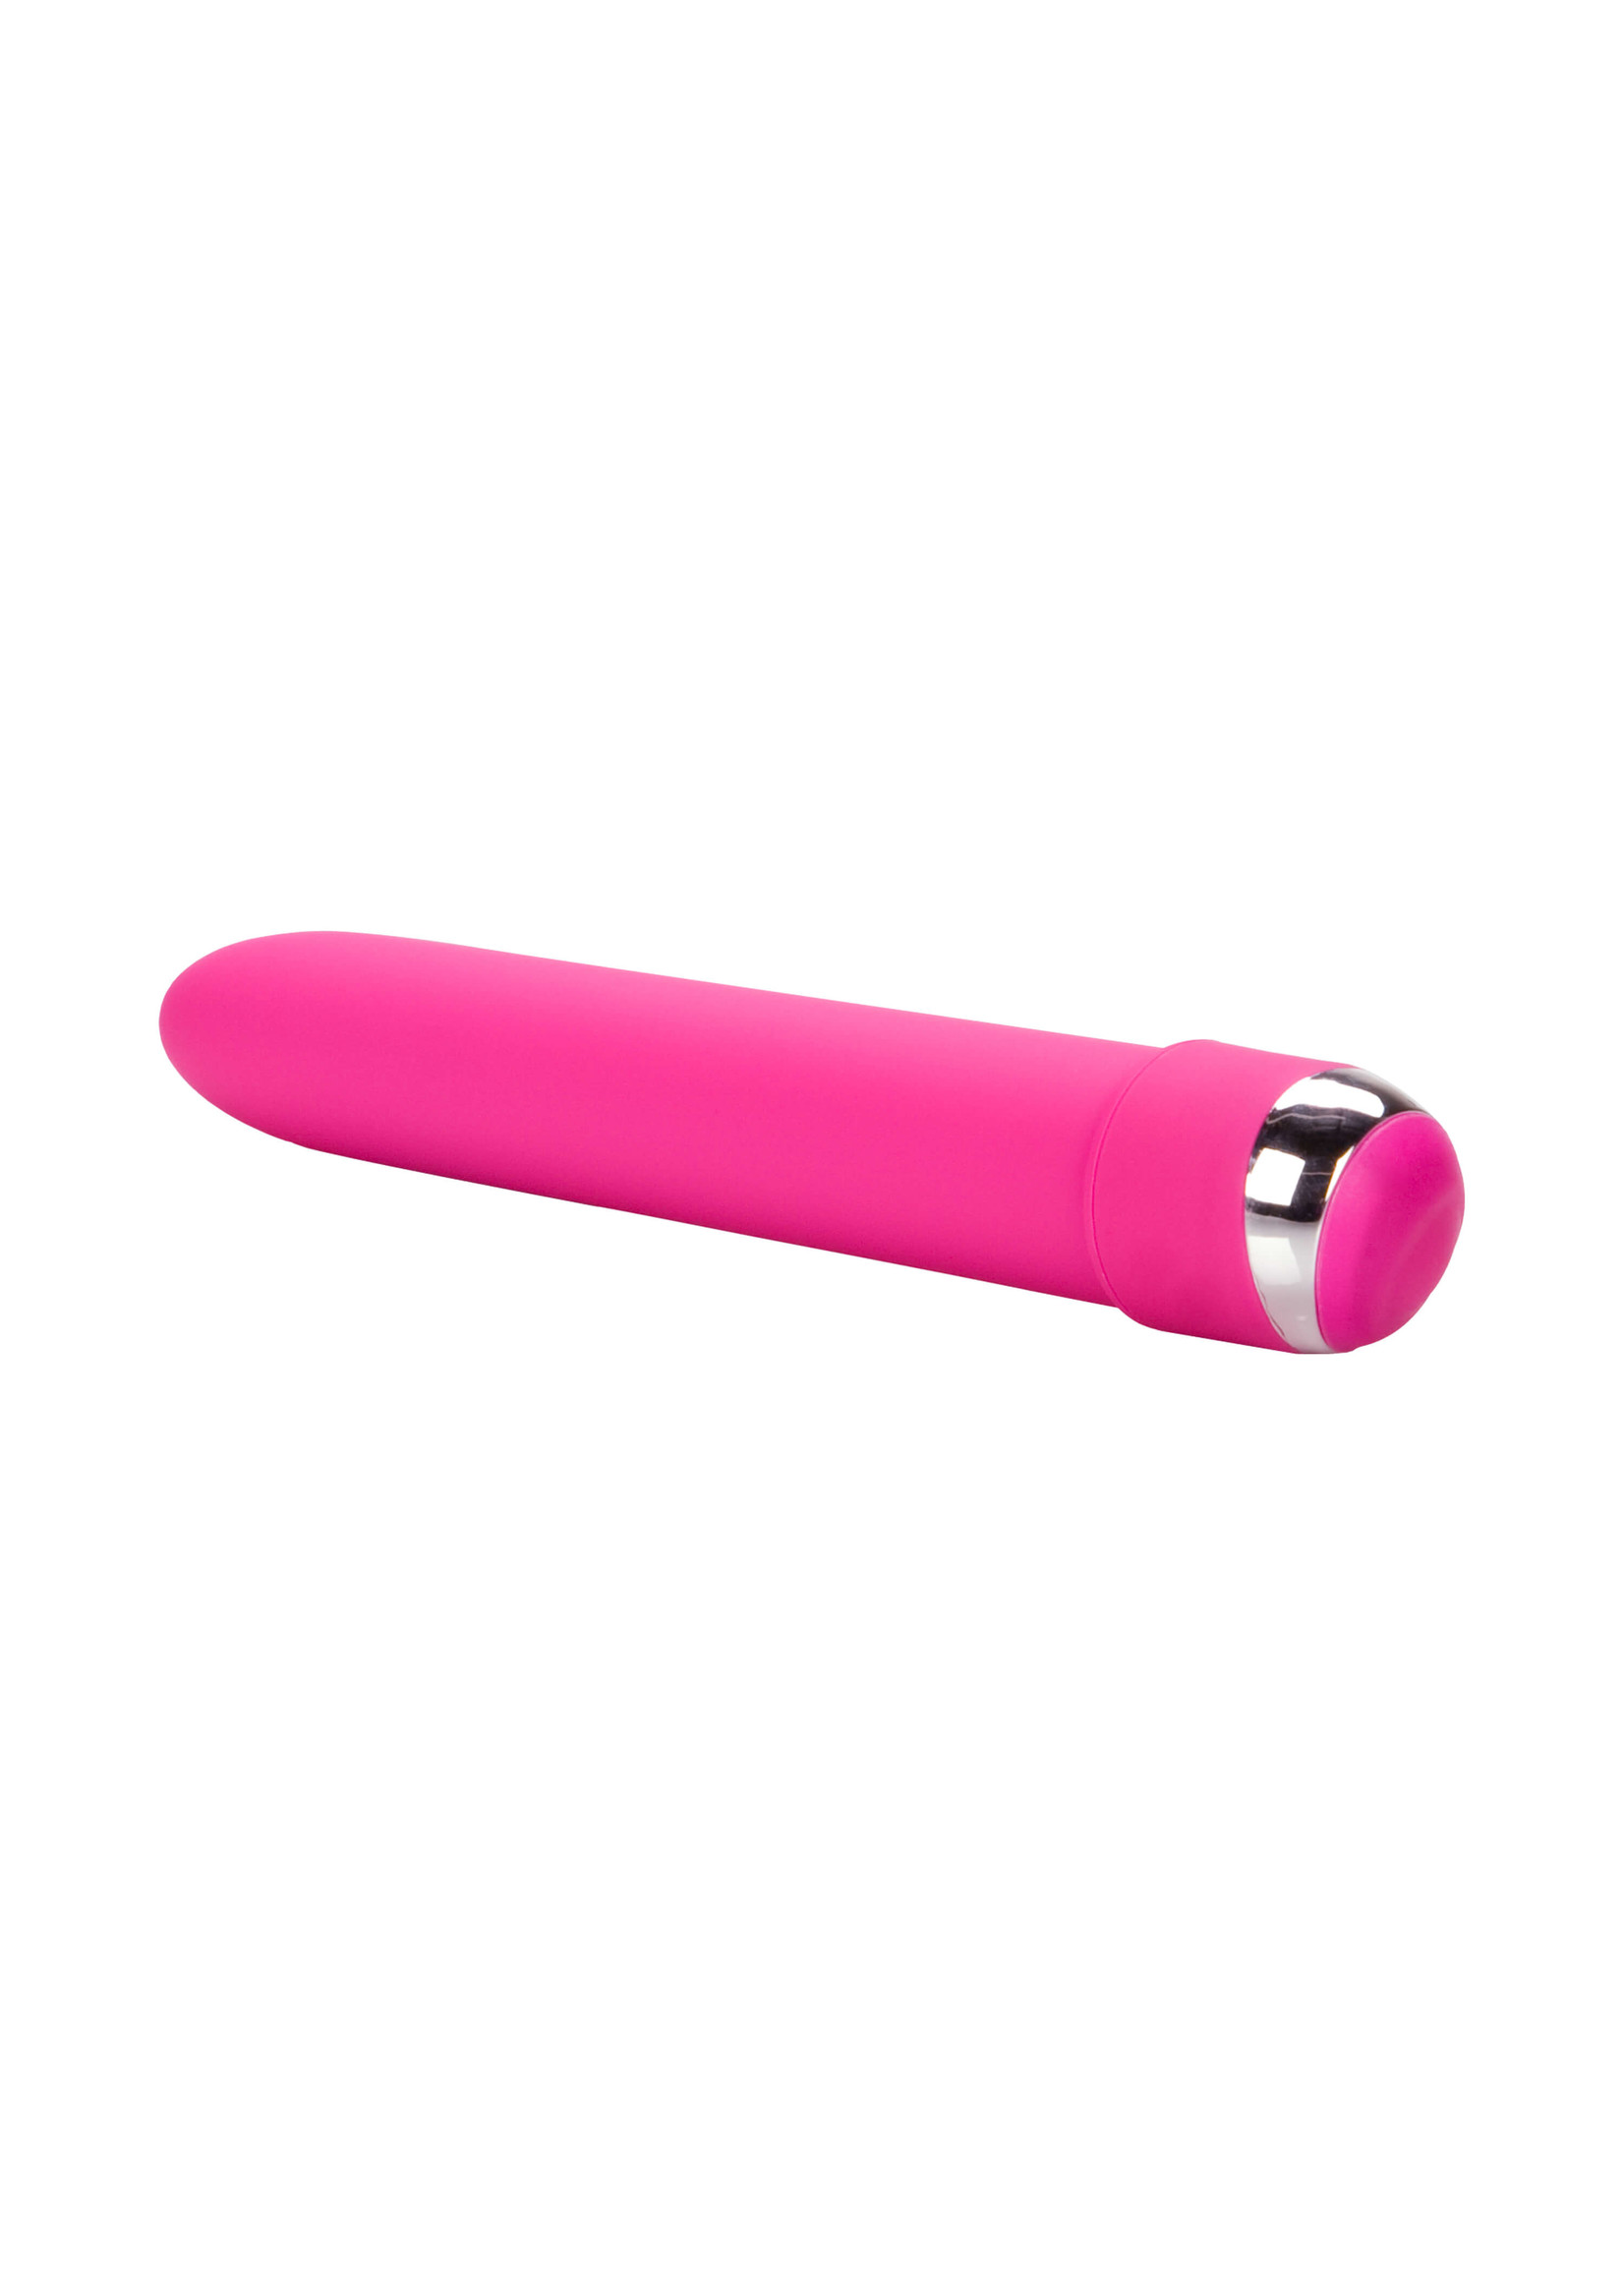 Cal Exotic Novelties 7-Function Classic Chic- Standard Pink